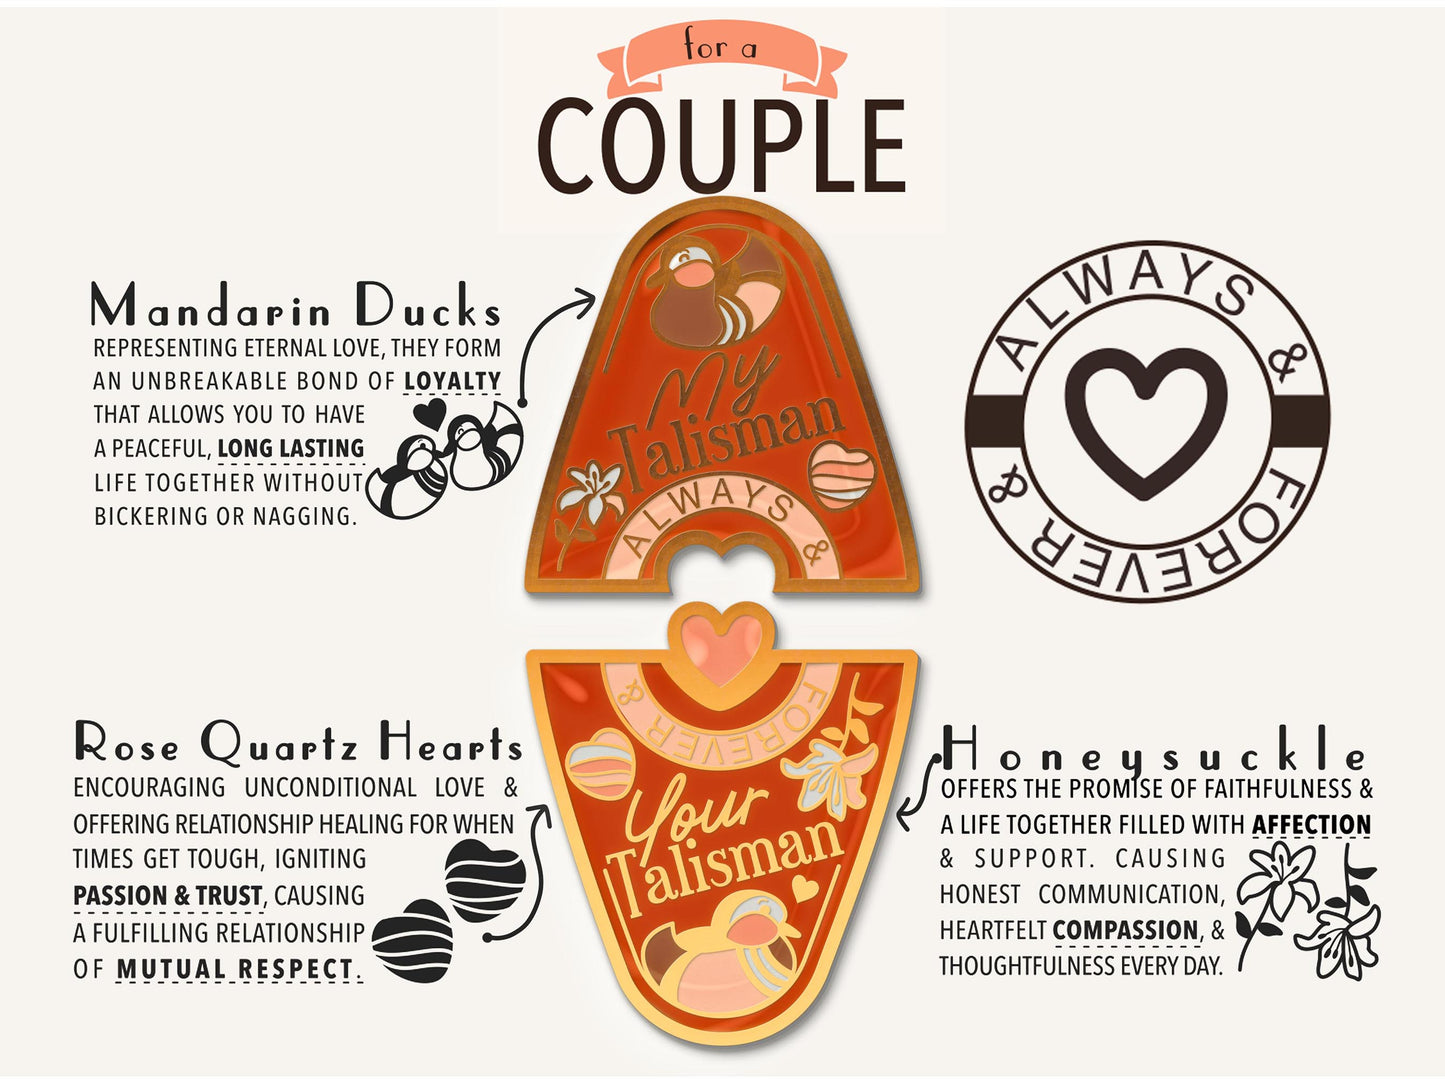 A illustrated diagram outline the symbolism of the different design elements of the for a Couple's Talisman pin. Information includes the meaning of the Mandarin ducks, rose quartz hearts and honeysuckle.